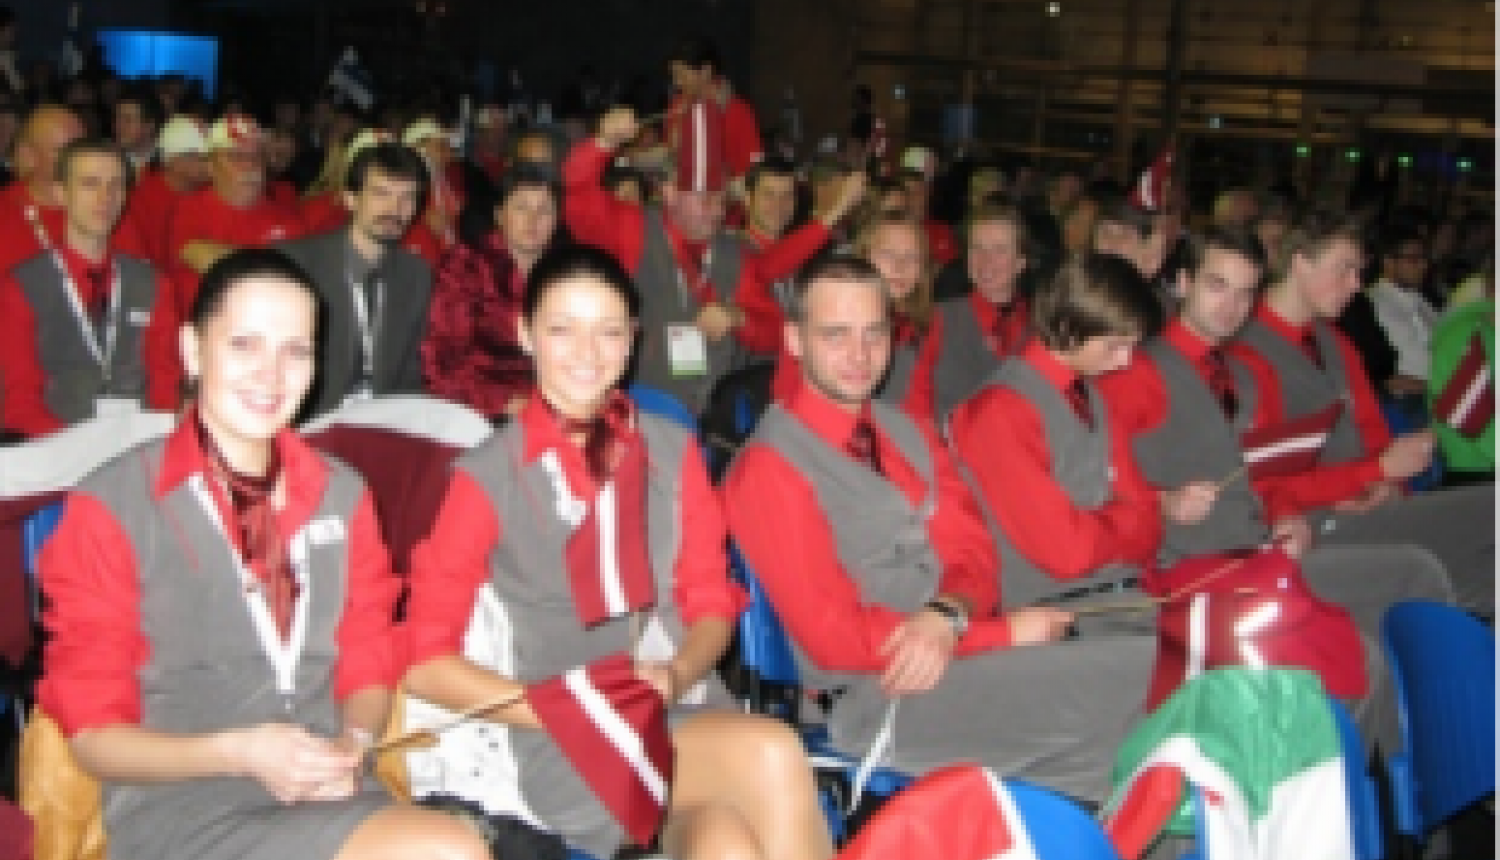 Young professionals receive gold and silver prizes at the international competition EuroSkills 2010